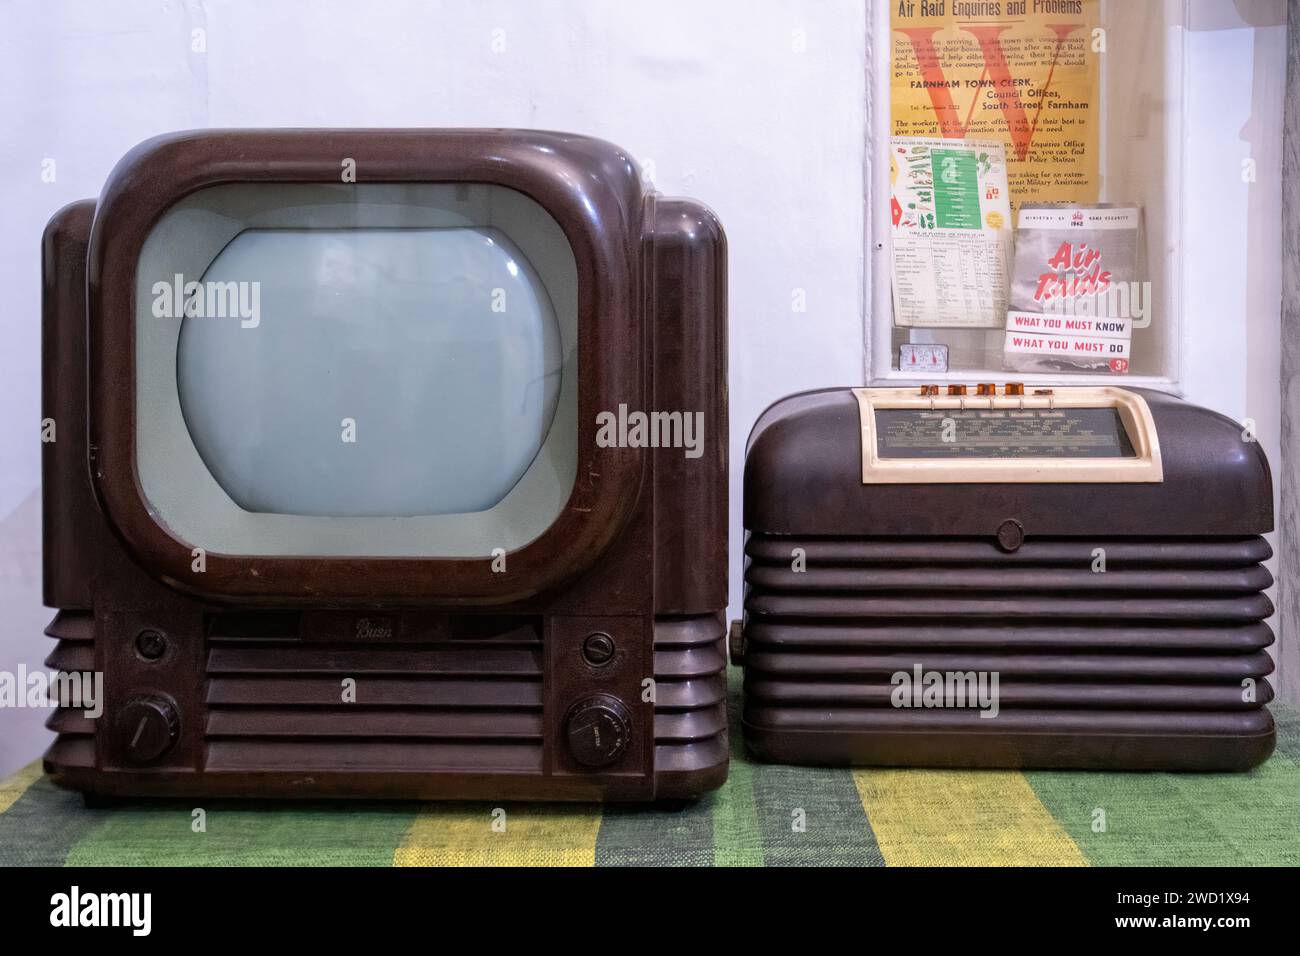 A 1950s television set and wireless radio, retro vintage exhibits in a museum, England, UK Stock Photo